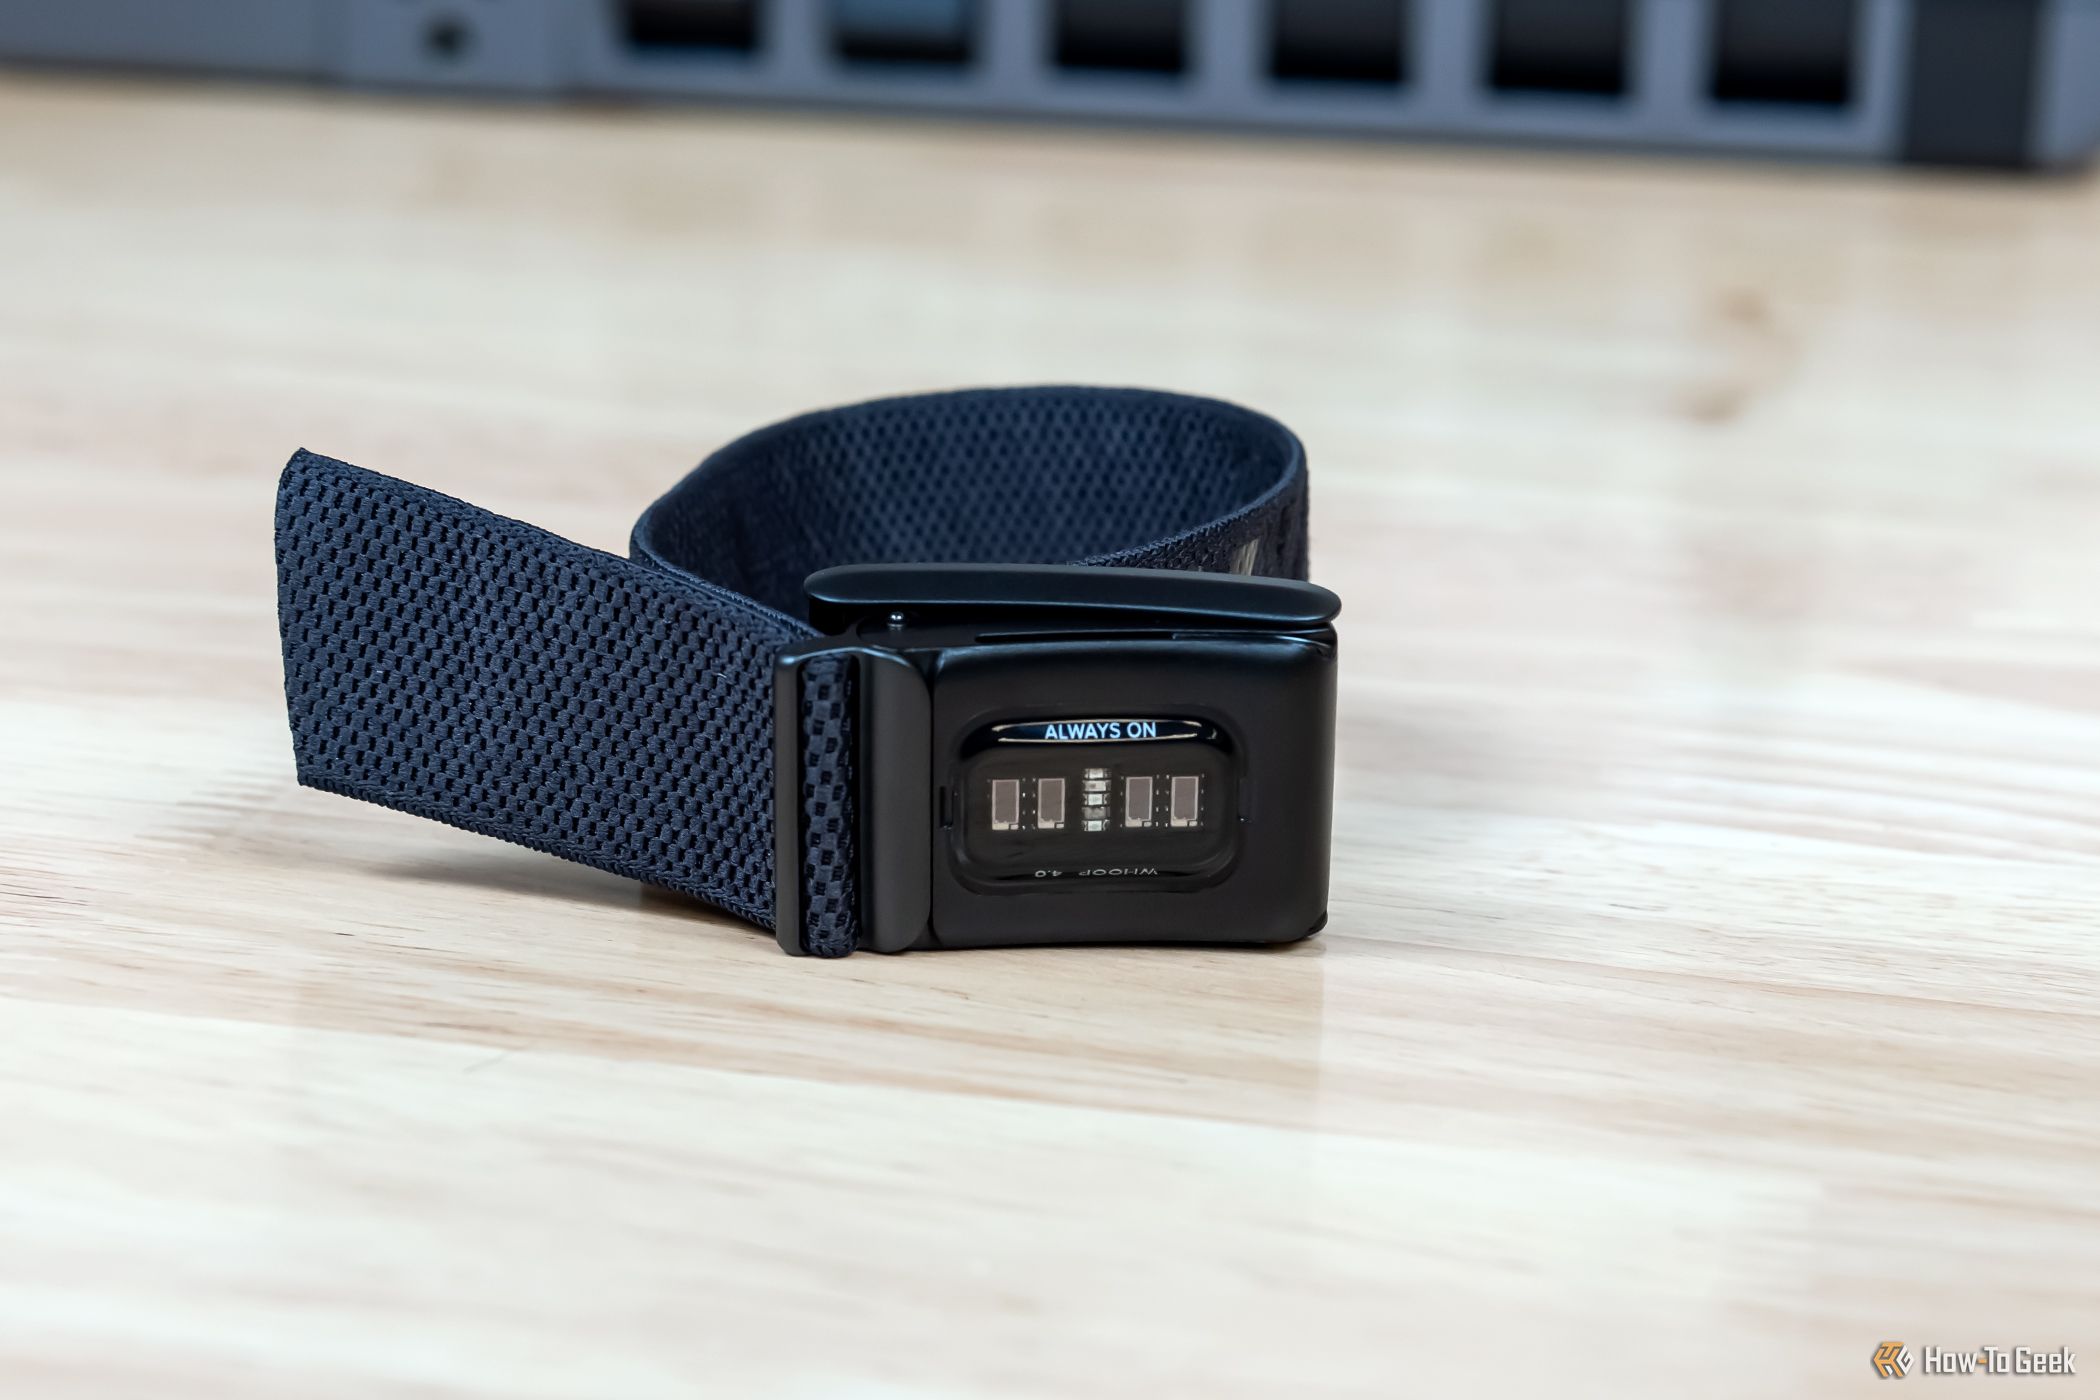 Whoop 4.0 Review: A Serious Tracker for Fitness, Health, and Life